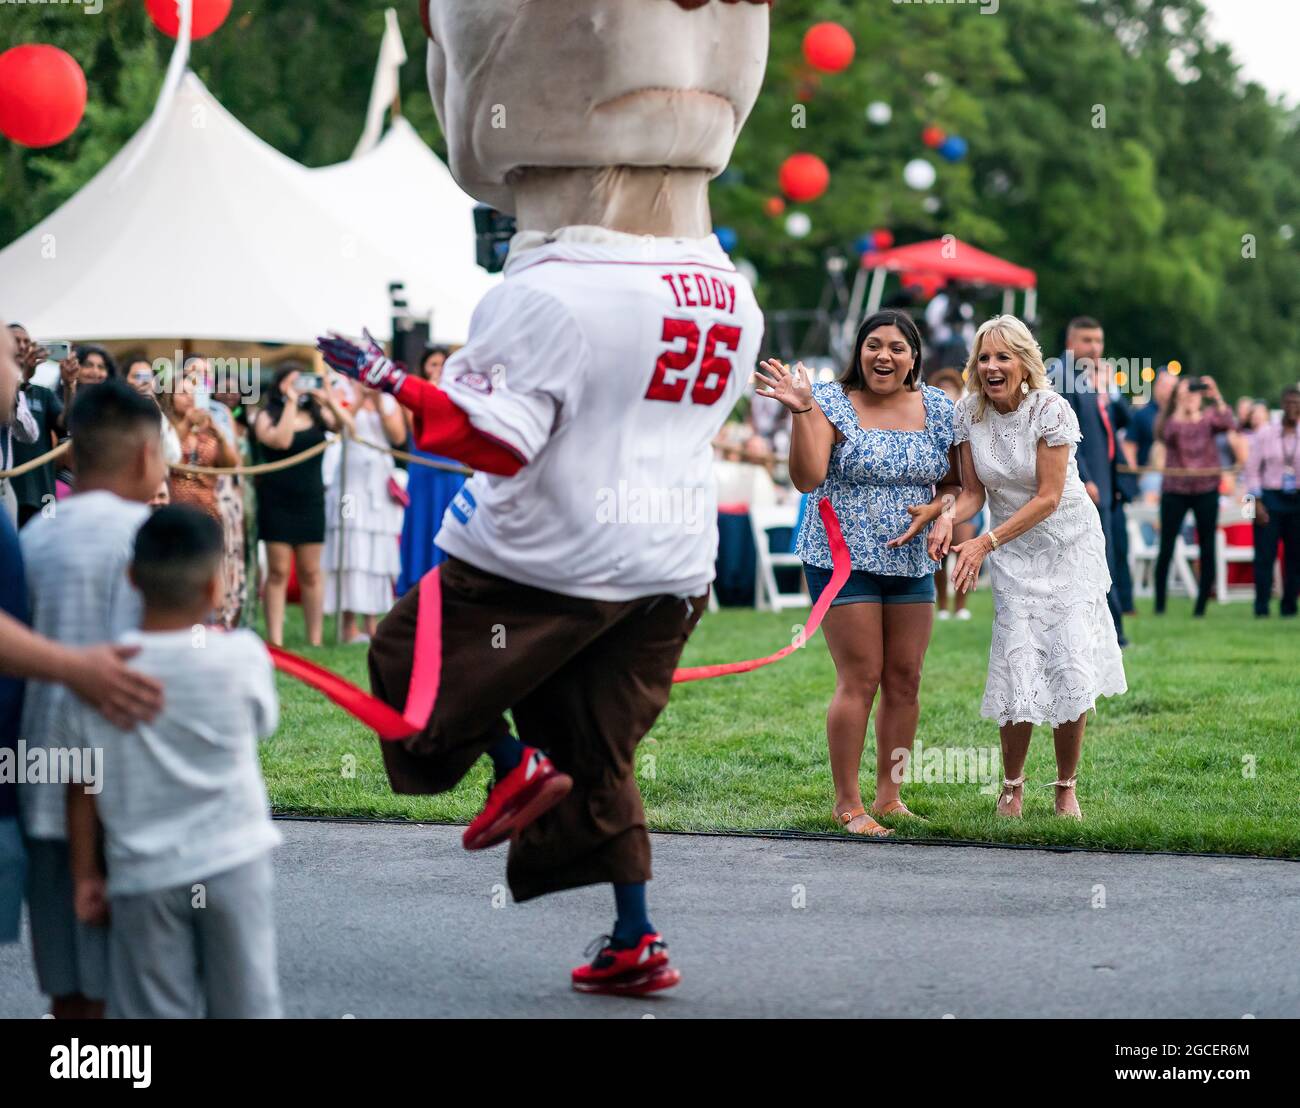 First Lady Jill Biden holds the finish line tape as the Washington Nationals’ Racing Presidents race on the South Lawn Driveway of the White House, Sunday, July 4, 2021, during the Fourth of July celebration. (Official White House Photo by Adam Schultz) Stock Photo